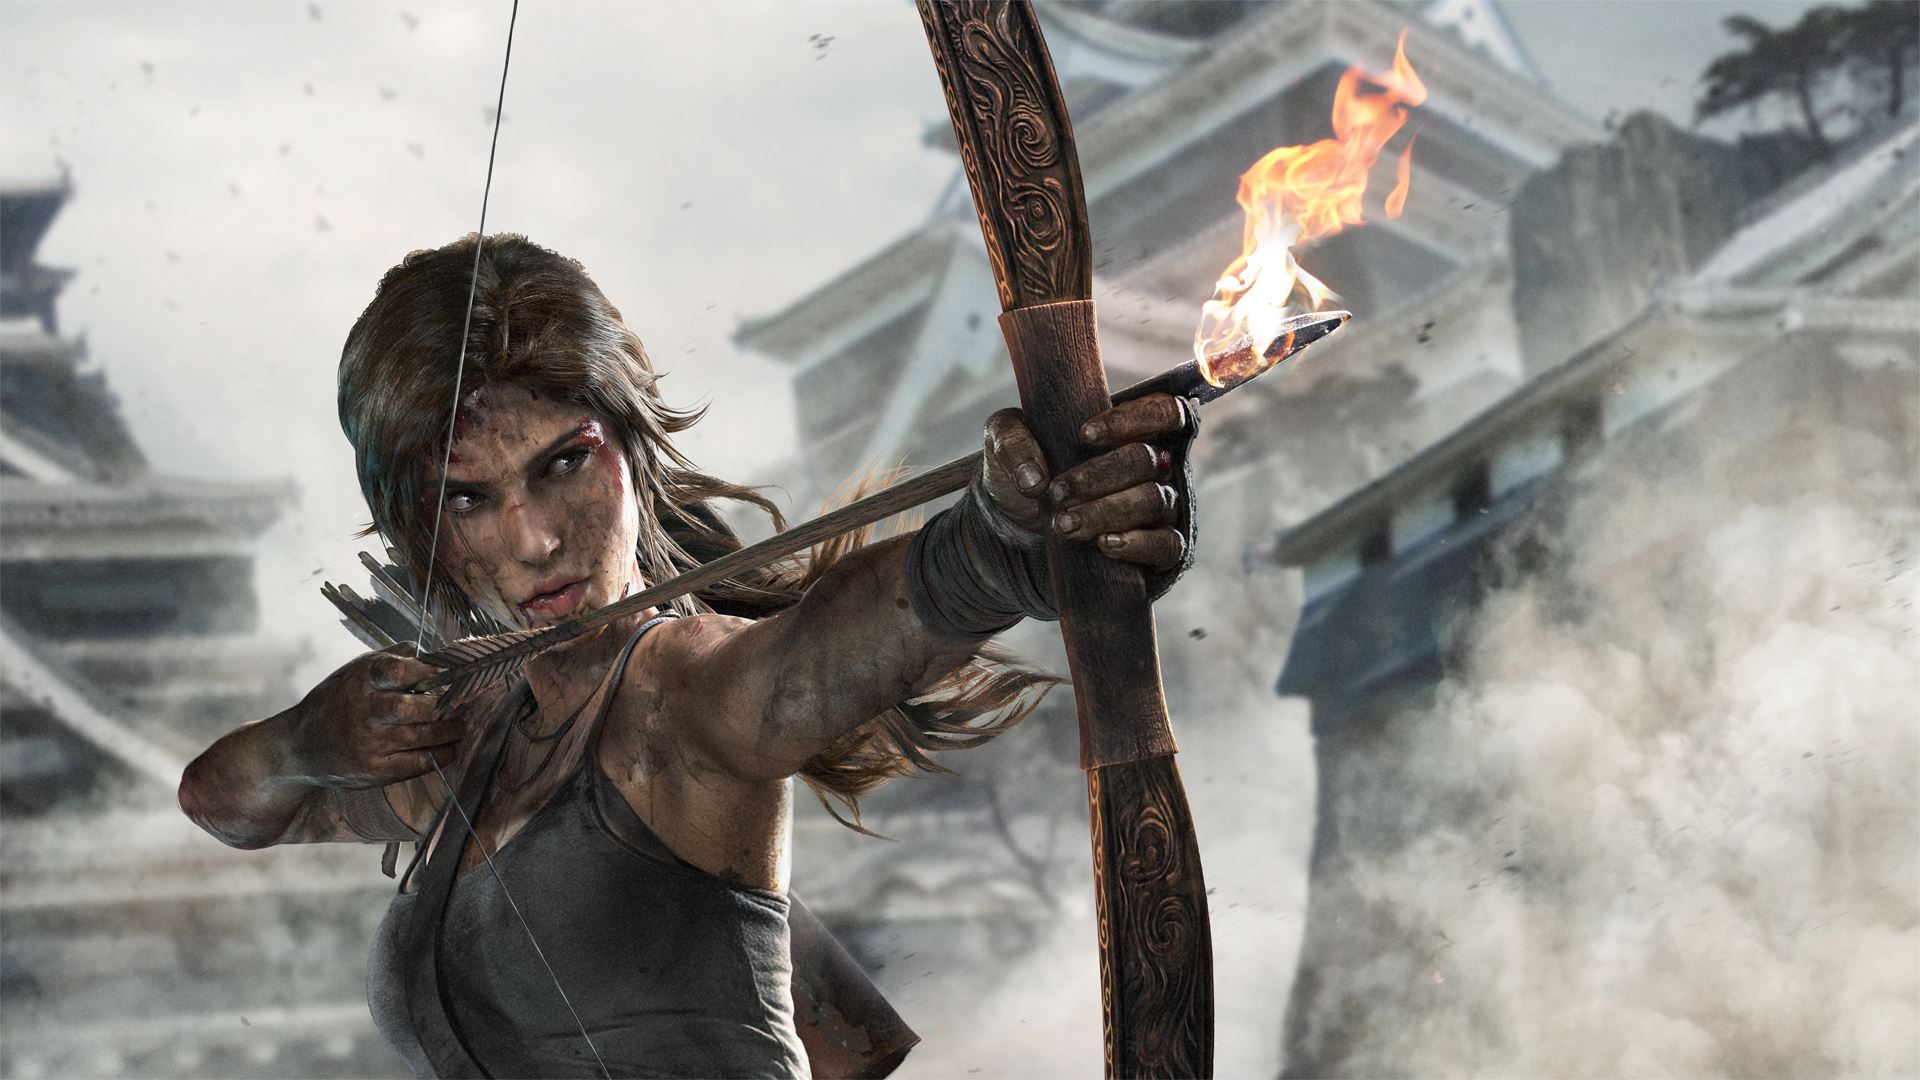 Lara croft women tomb raider video games bow arrow arrows fire wallpapers hd desktop and mobile backgrounds